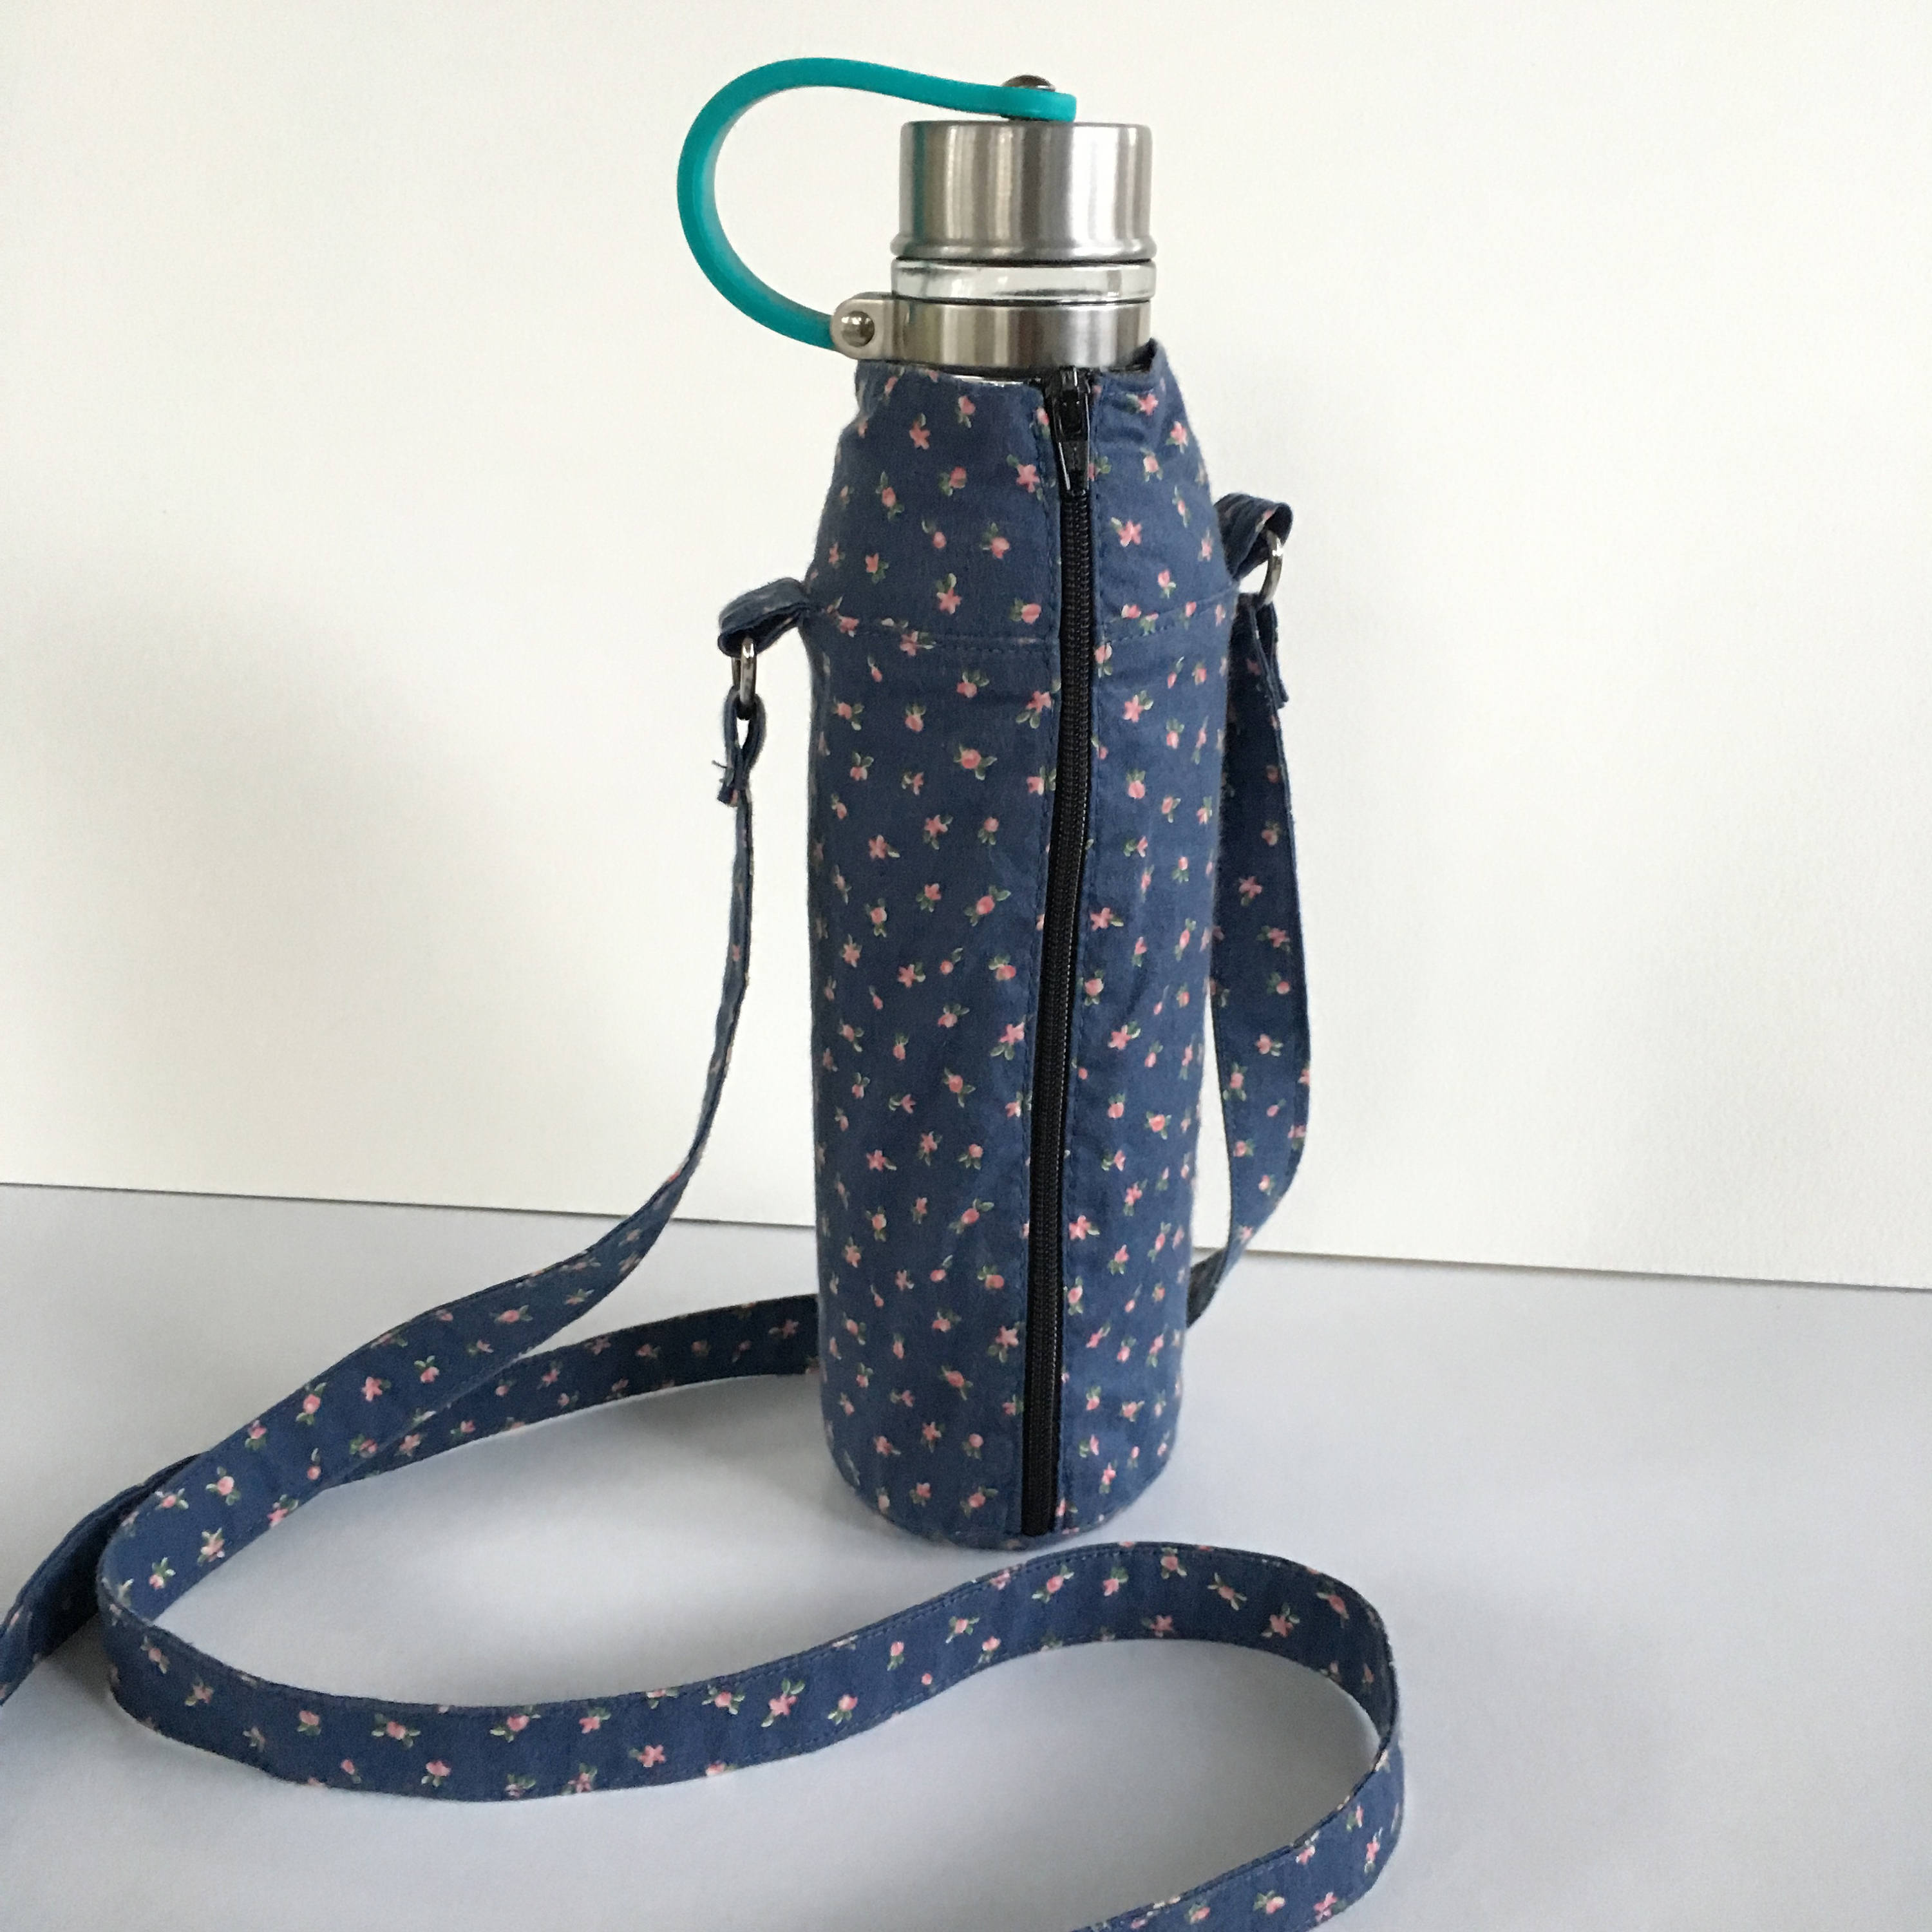 Water Bottle Holder Made to Order in the fabric of your